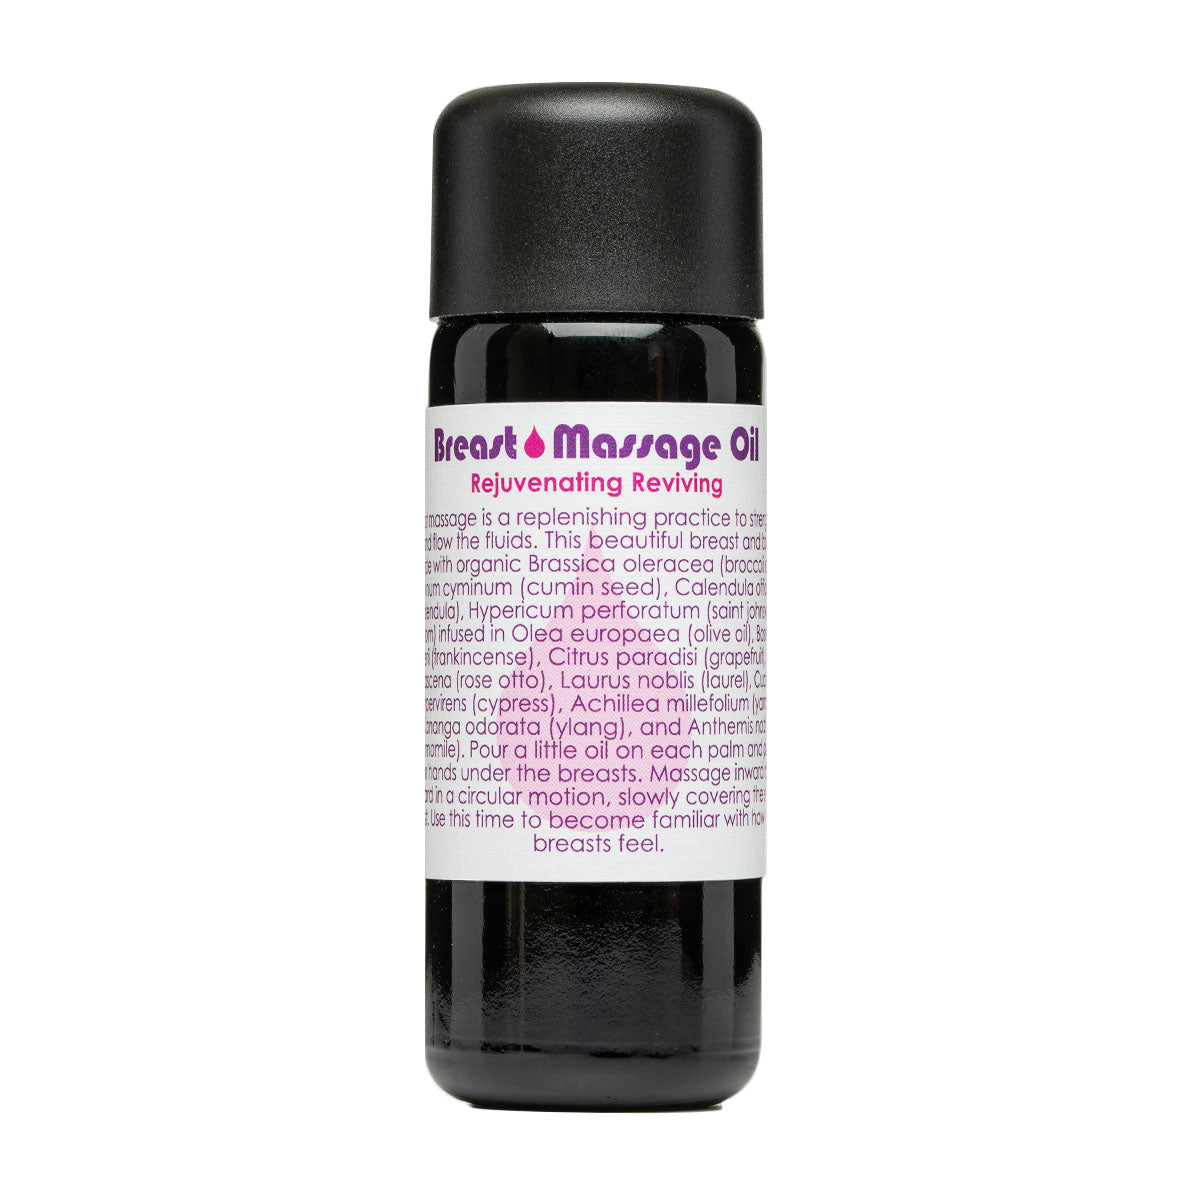 Breast Health Massage Oil | Living Libations | Raw Living UK | Beauty | Skin Care | Living Libations Breast Health Massage Oil (50, 100ml) is designed to regenerate cells, keeping breasts healthy. Made using highest quality oils &amp; botanicals.